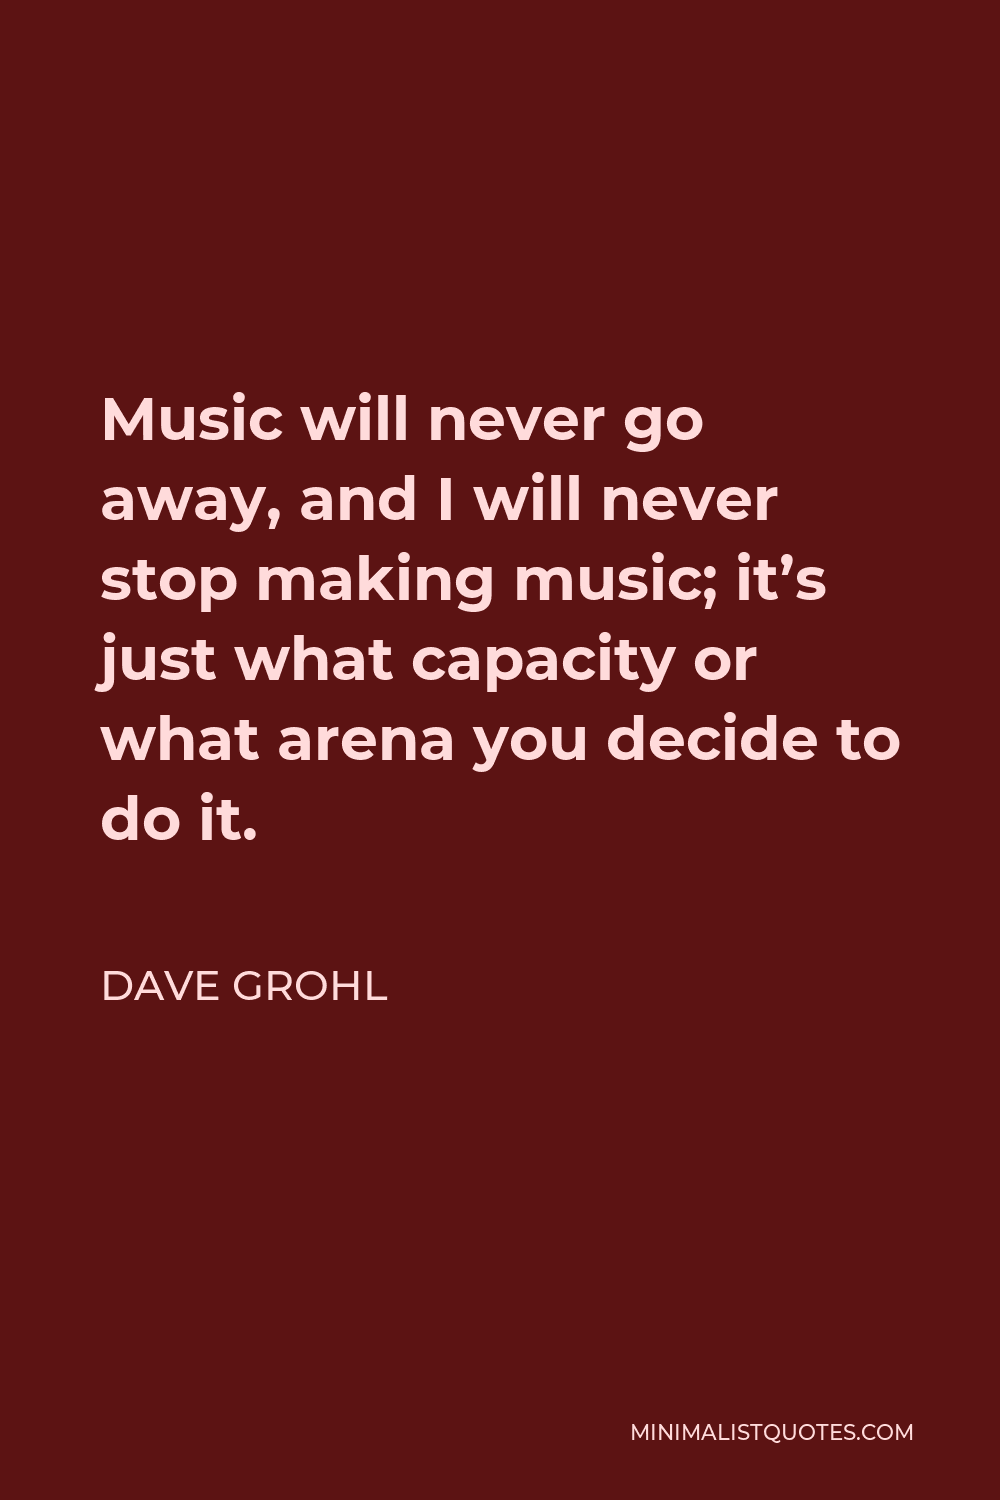 Dave Grohl Quote - Music will never go away, and I will never stop making music; it’s just what capacity or what arena you decide to do it.